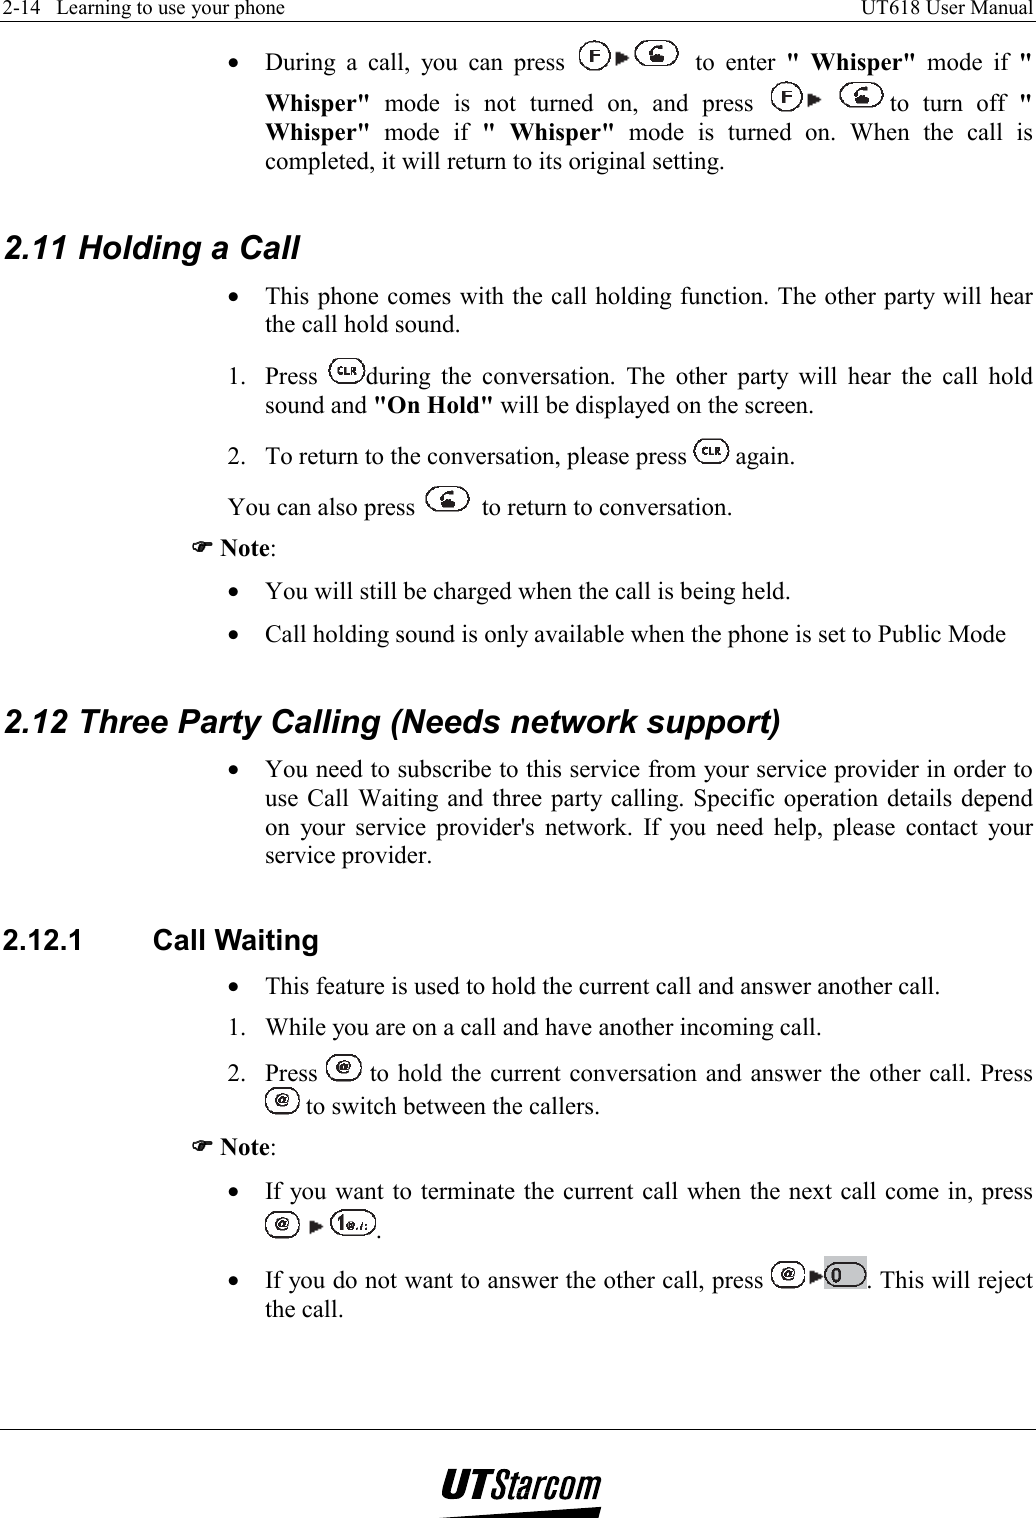 2-14   Learning to use your phone    UT618 User Manual   •  During a call, you can press   to enter &quot; Whisper&quot; mode if &quot; Whisper&quot; mode is not turned on, and press   to turn off &quot; Whisper&quot; mode if &quot; Whisper&quot; mode is turned on. When the call is completed, it will return to its original setting.  2.11 Holding a Call •  This phone comes with the call holding function. The other party will hear the call hold sound. 1. Press  during the conversation. The other party will hear the call hold sound and &quot;On Hold&quot; will be displayed on the screen. 2.  To return to the conversation, please press   again.  You can also press   to return to conversation. )))) Note: •  You will still be charged when the call is being held. •  Call holding sound is only available when the phone is set to Public Mode  2.12 Three Party Calling (Needs network support) •  You need to subscribe to this service from your service provider in order to use Call Waiting and three party calling. Specific operation details depend on your service provider&apos;s network. If you need help, please contact your service provider.  2.12.1 Call Waiting •  This feature is used to hold the current call and answer another call. 1.  While you are on a call and have another incoming call. 2. Press   to hold the current conversation and answer the other call. Press  to switch between the callers. )))) Note: •  If you want to terminate the current call when the next call come in, press     . •  If you do not want to answer the other call, press  . This will reject the call.  